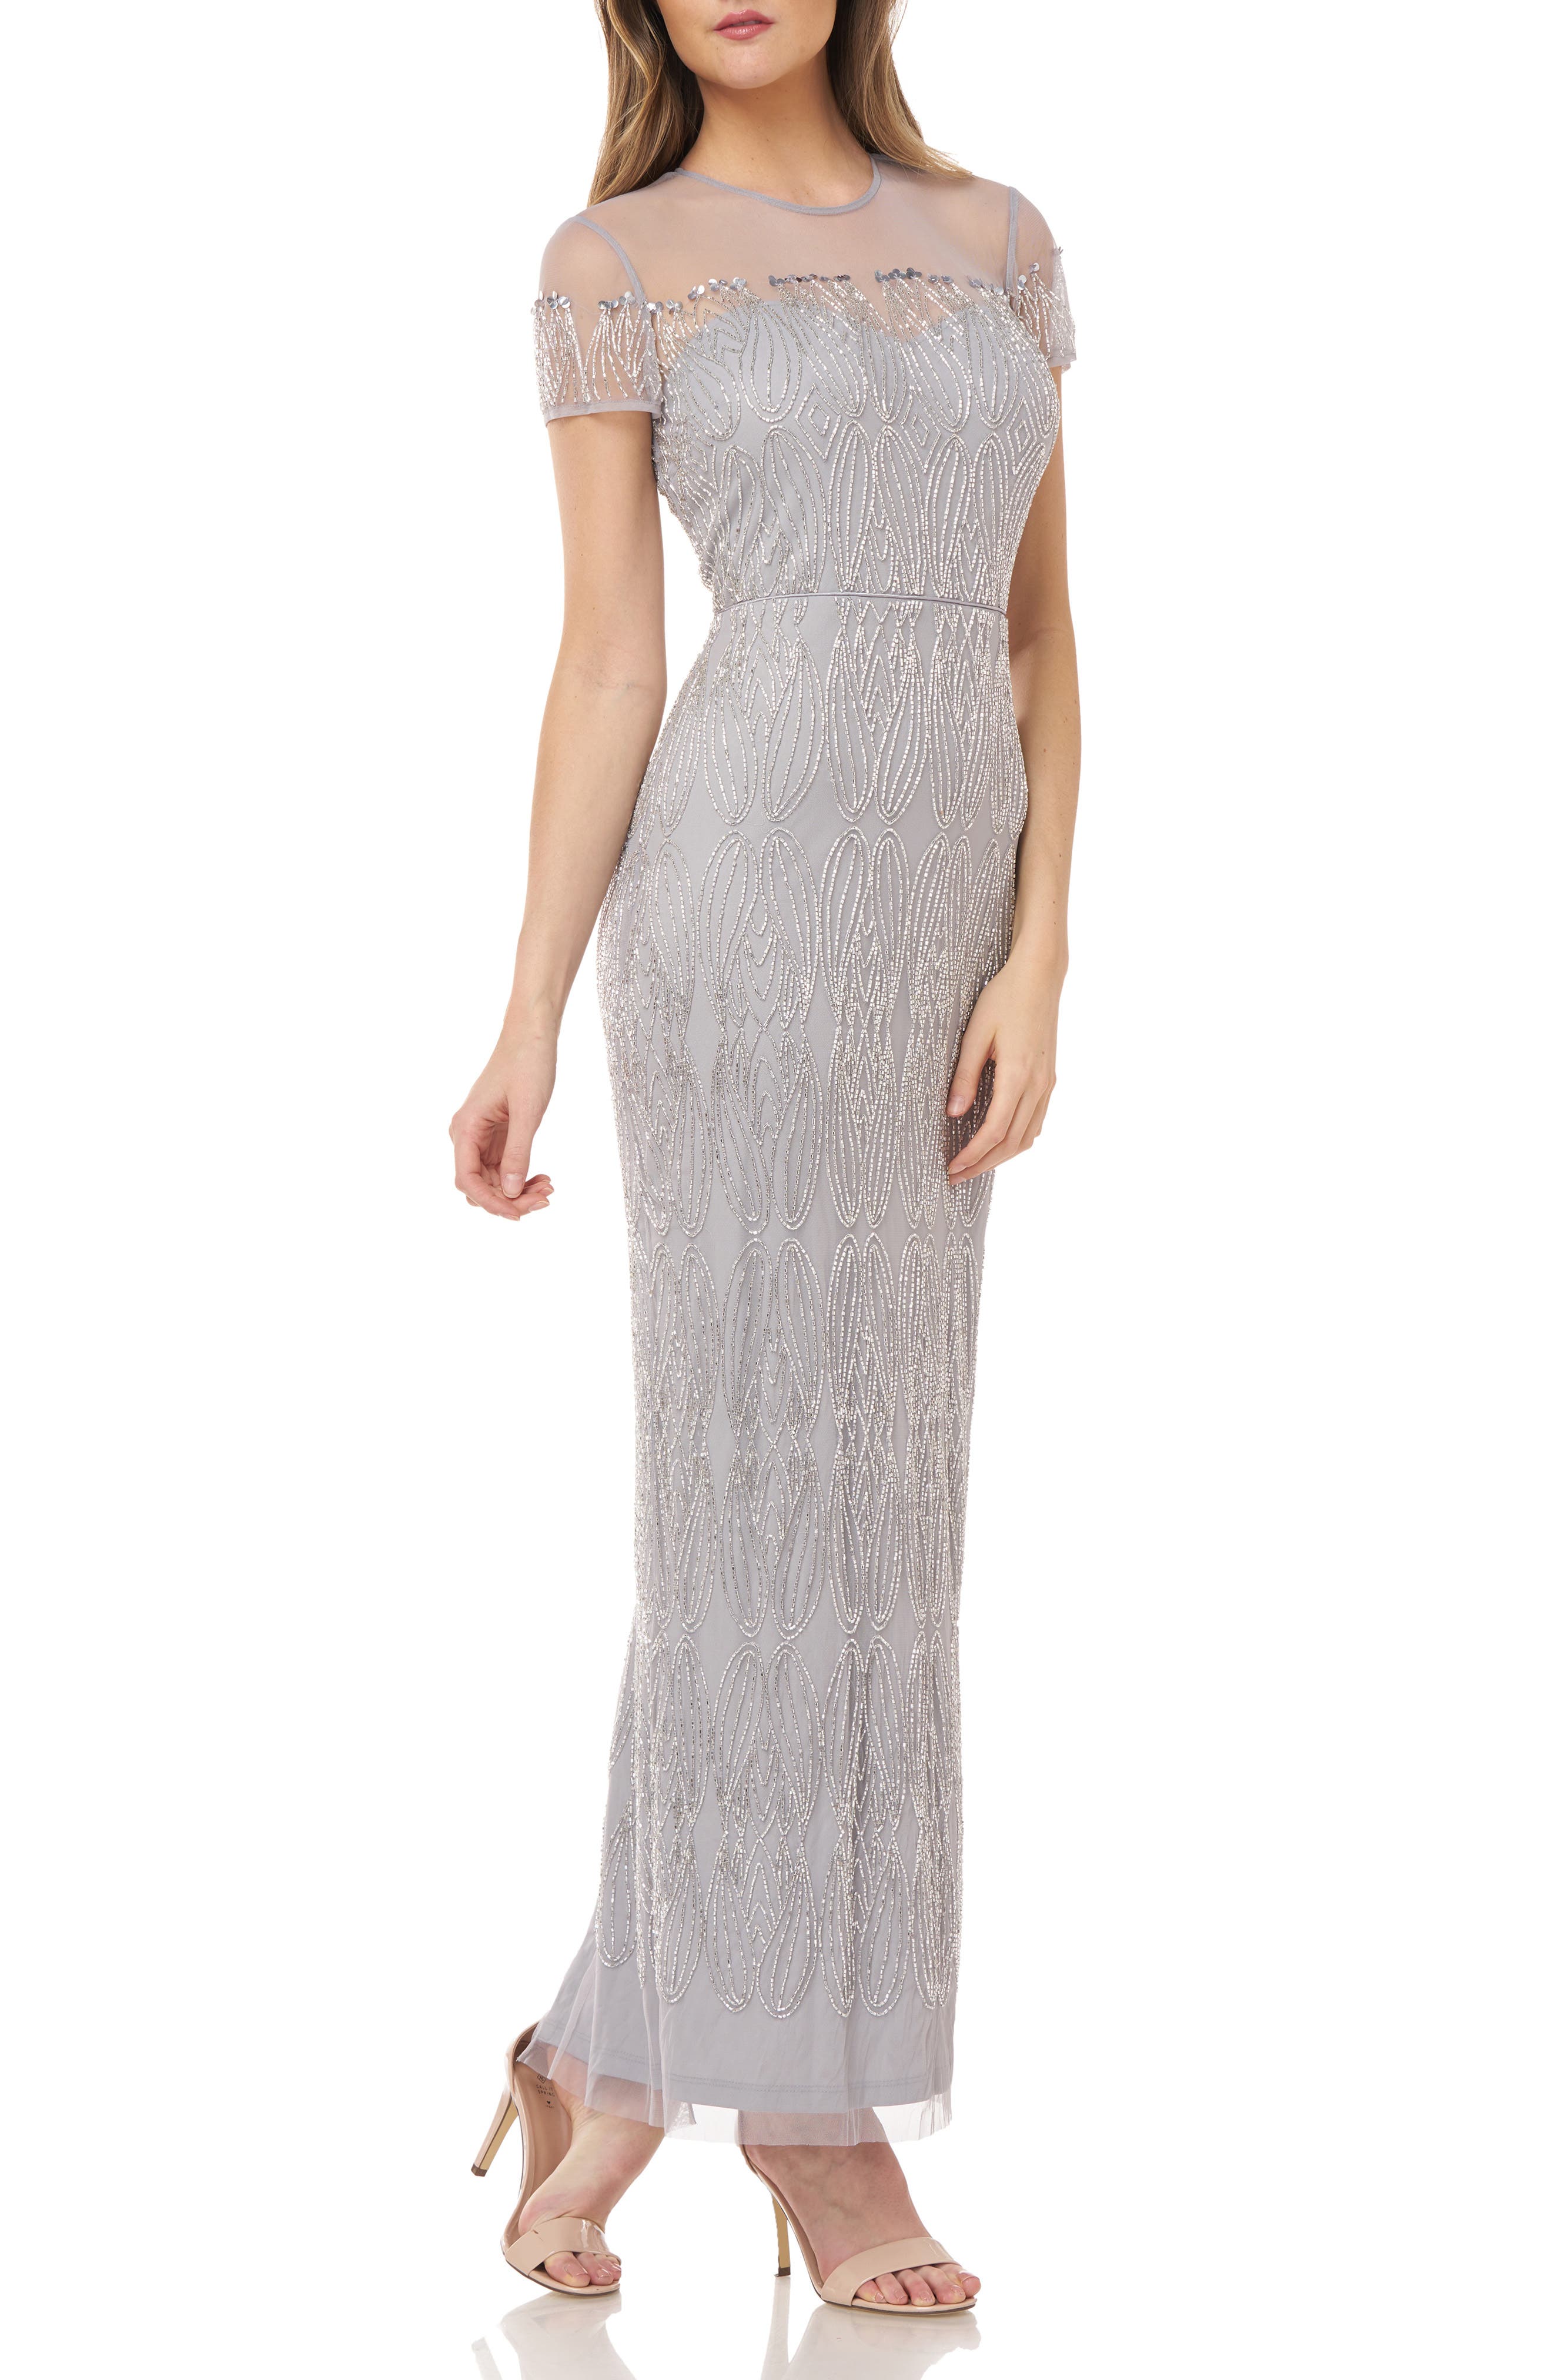 JS COLLECTIONS ILLUSION YOKE BEADED COLUMN GOWN,628292228690